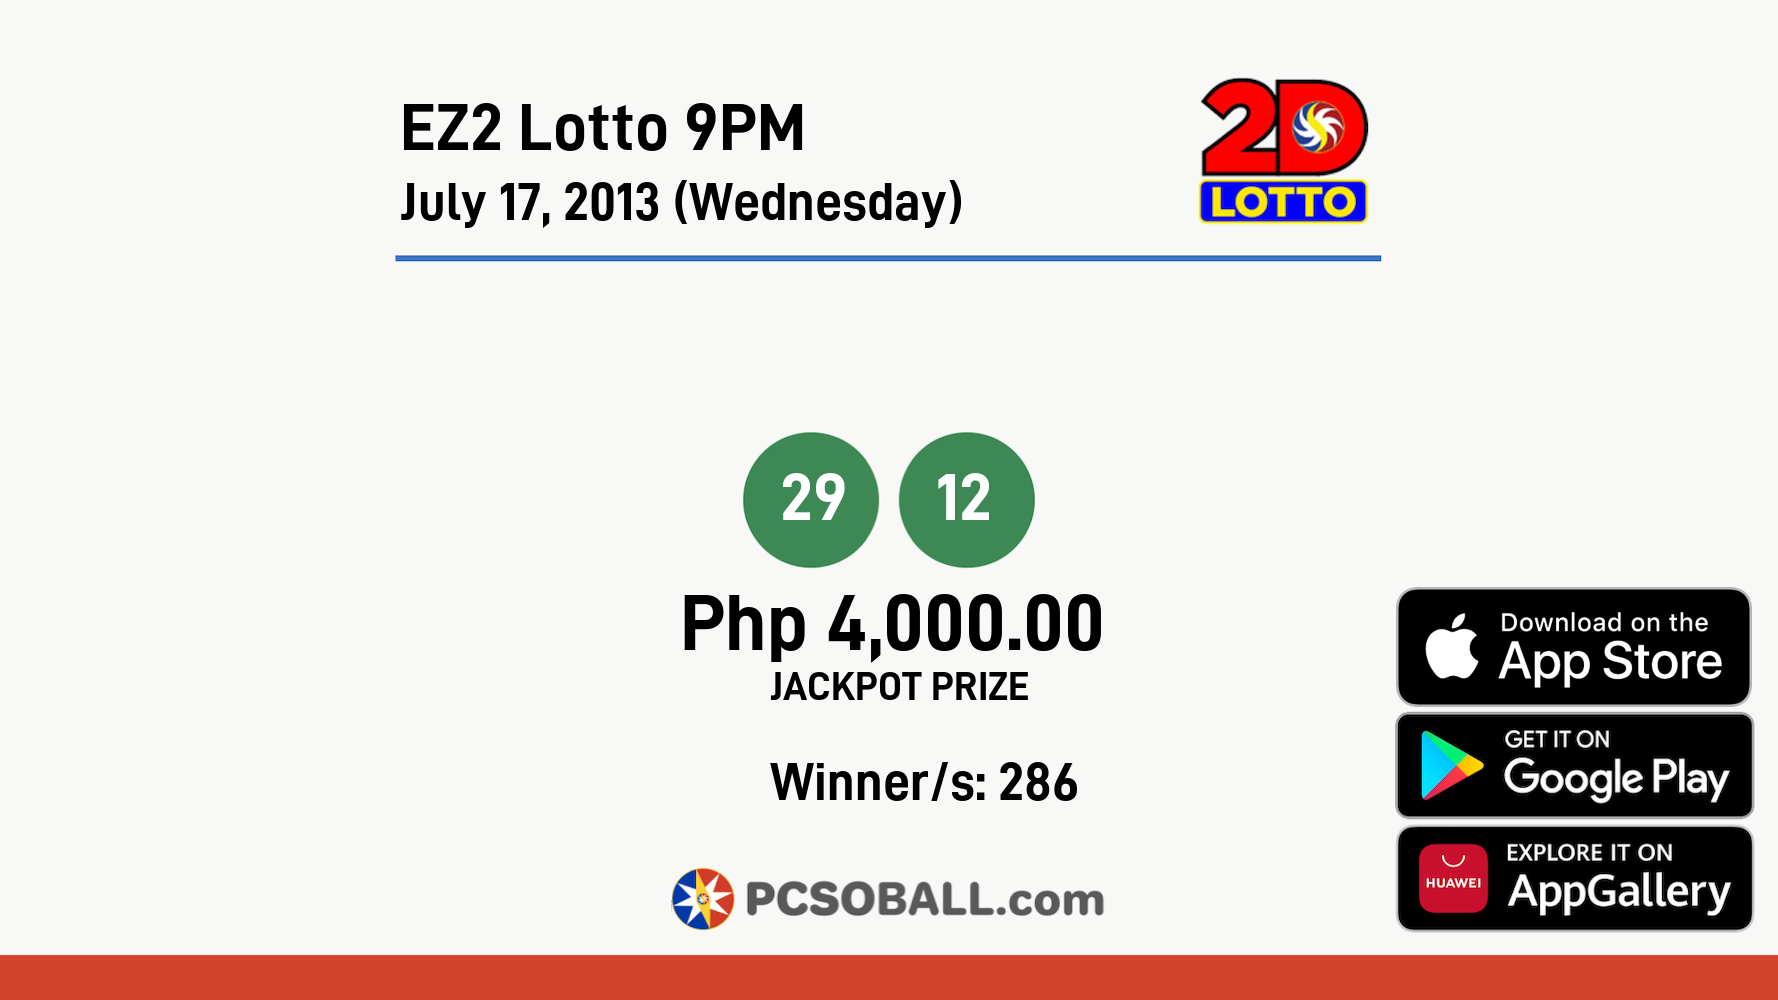 EZ2 Lotto 9PM July 17, 2013 (Wednesday) Result